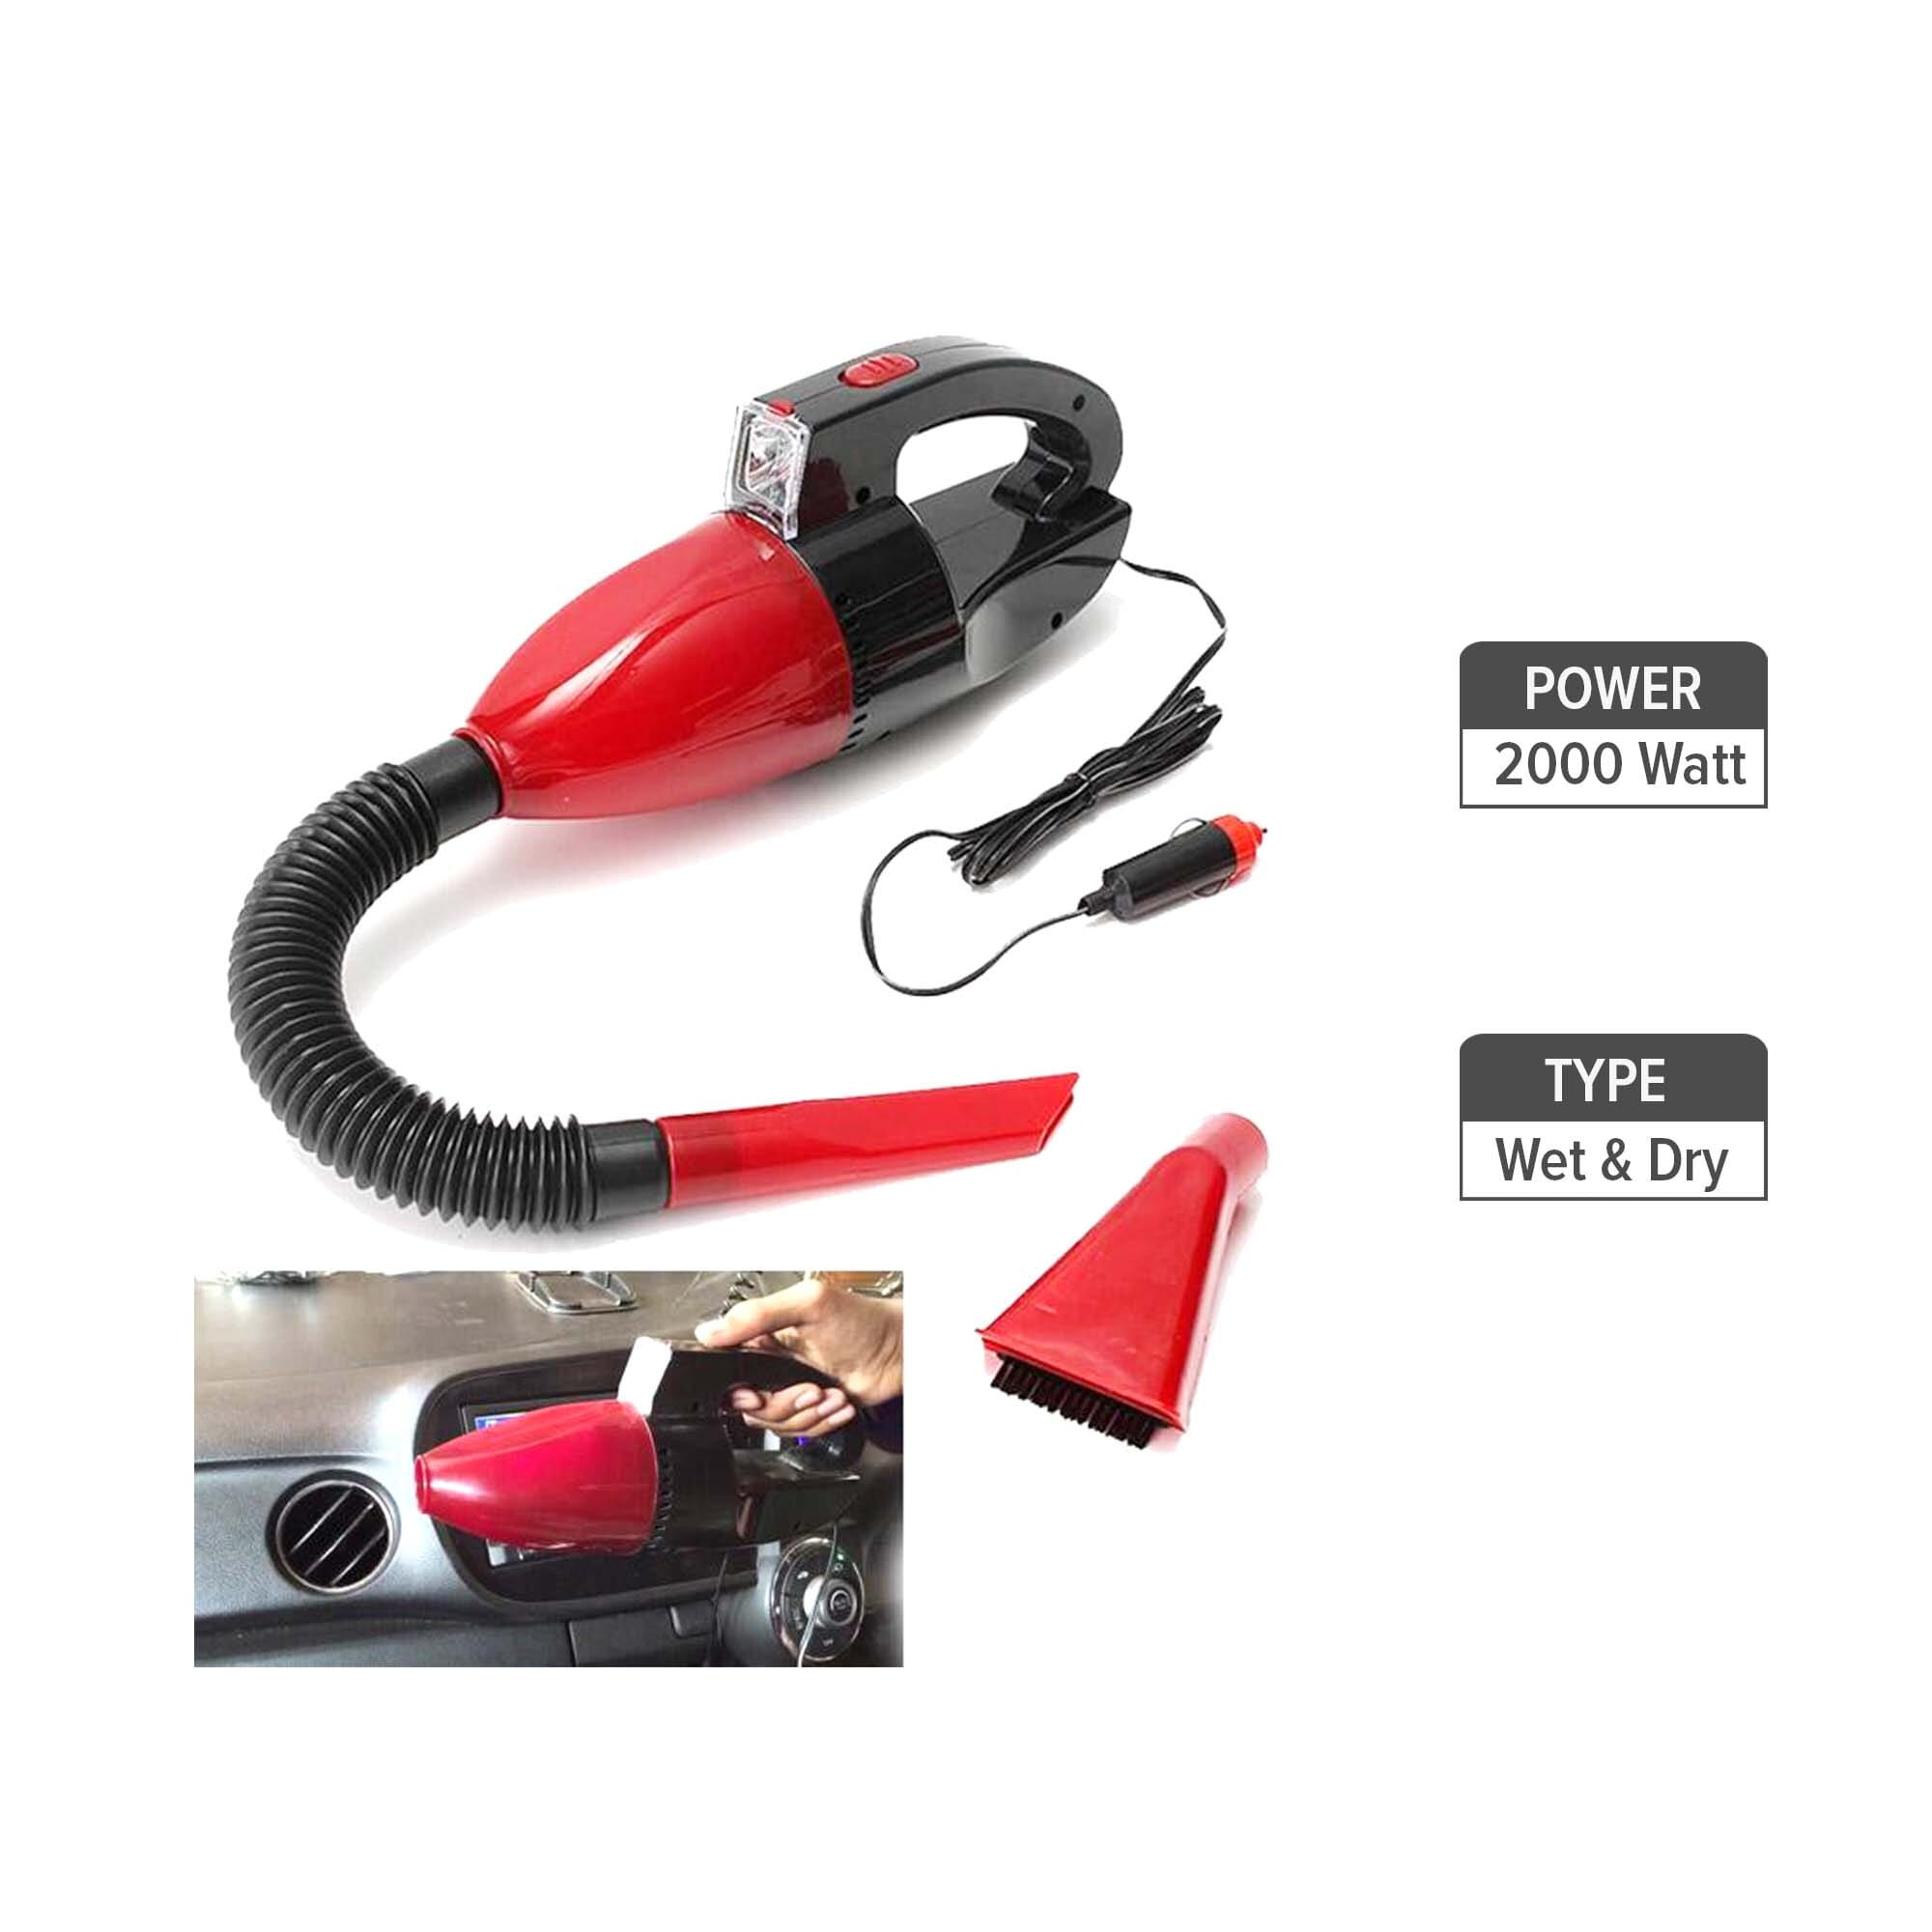 Vacuum Cleaner With Work Light & On - Off Switch